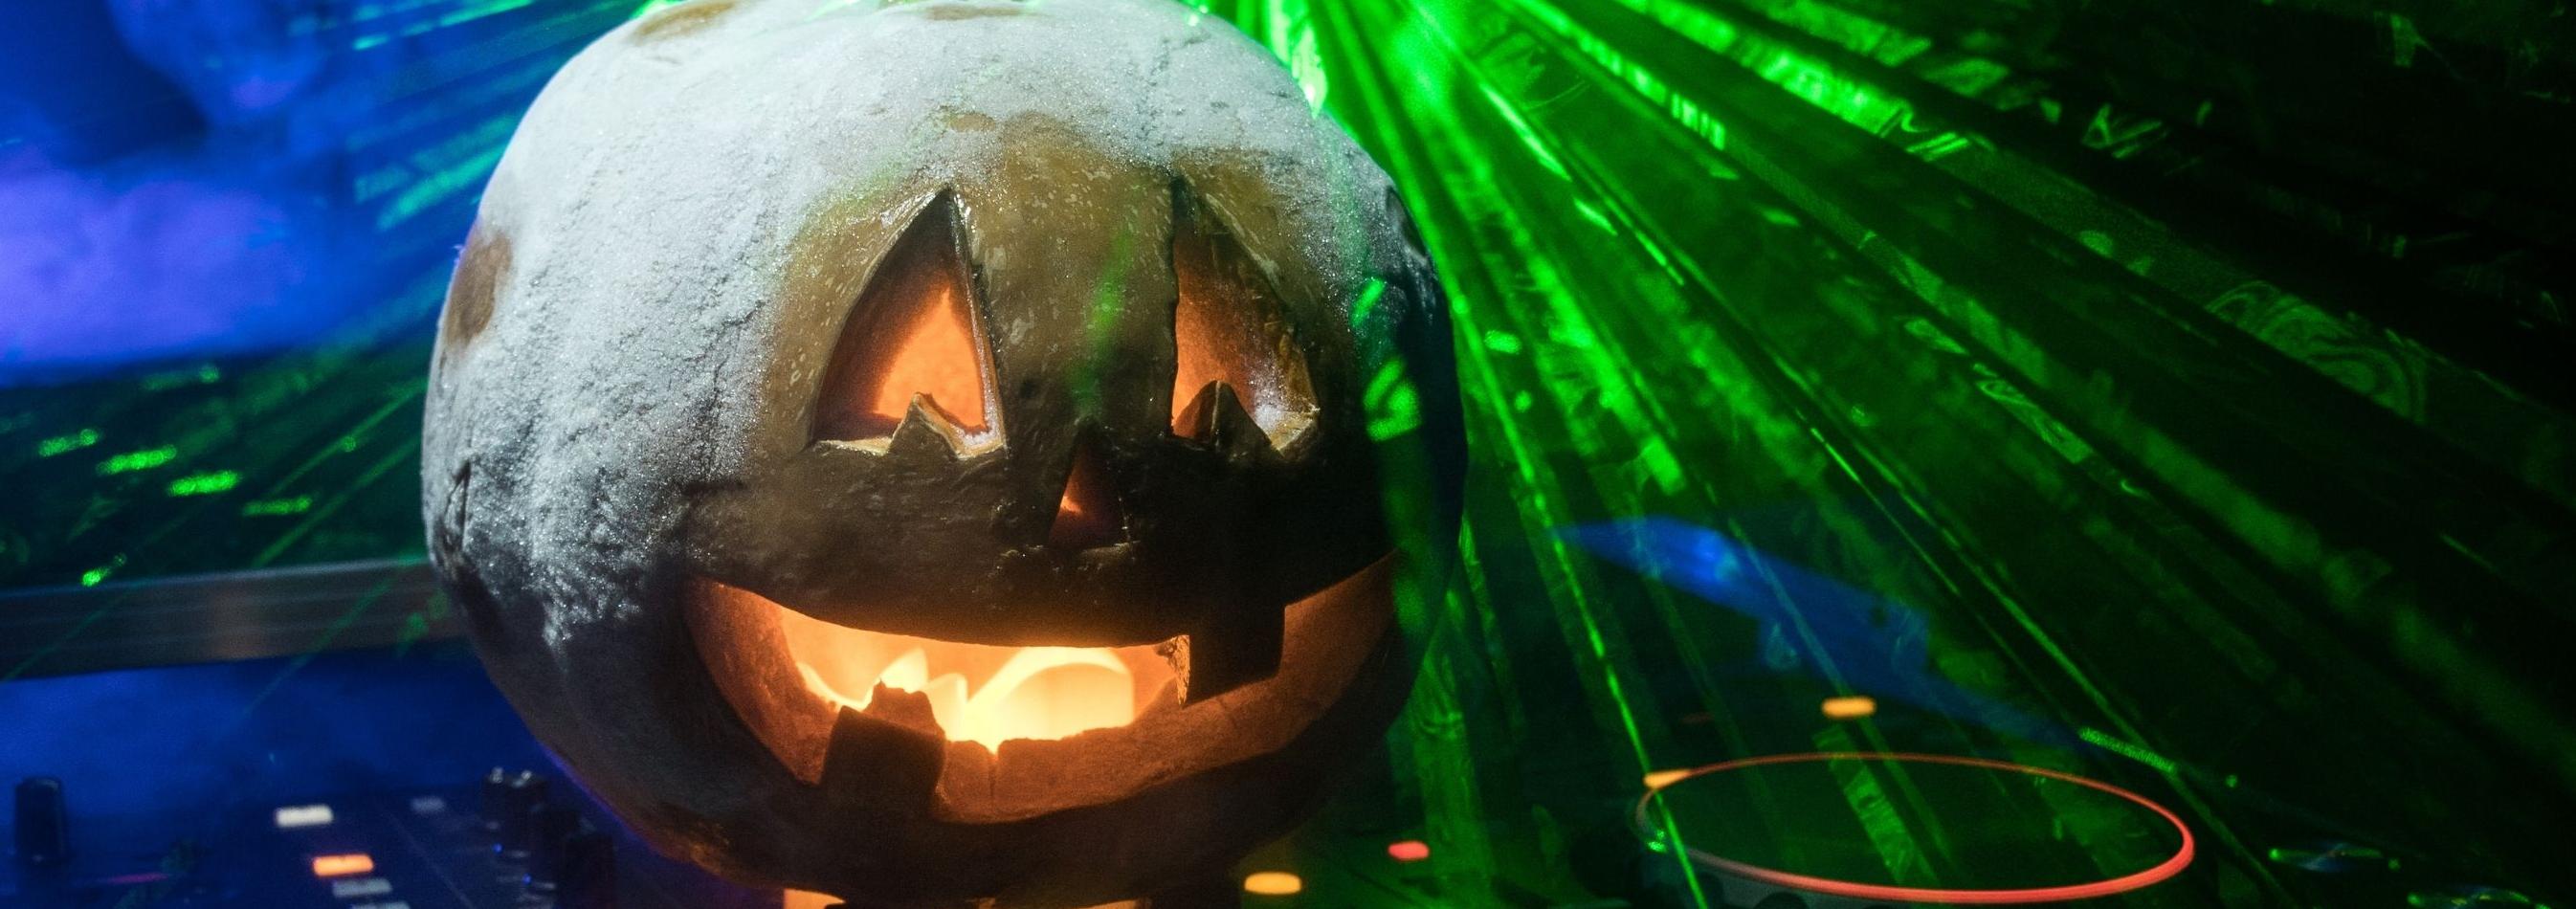 Jack O lantern sitting on DJ turntables with green lasers behind it